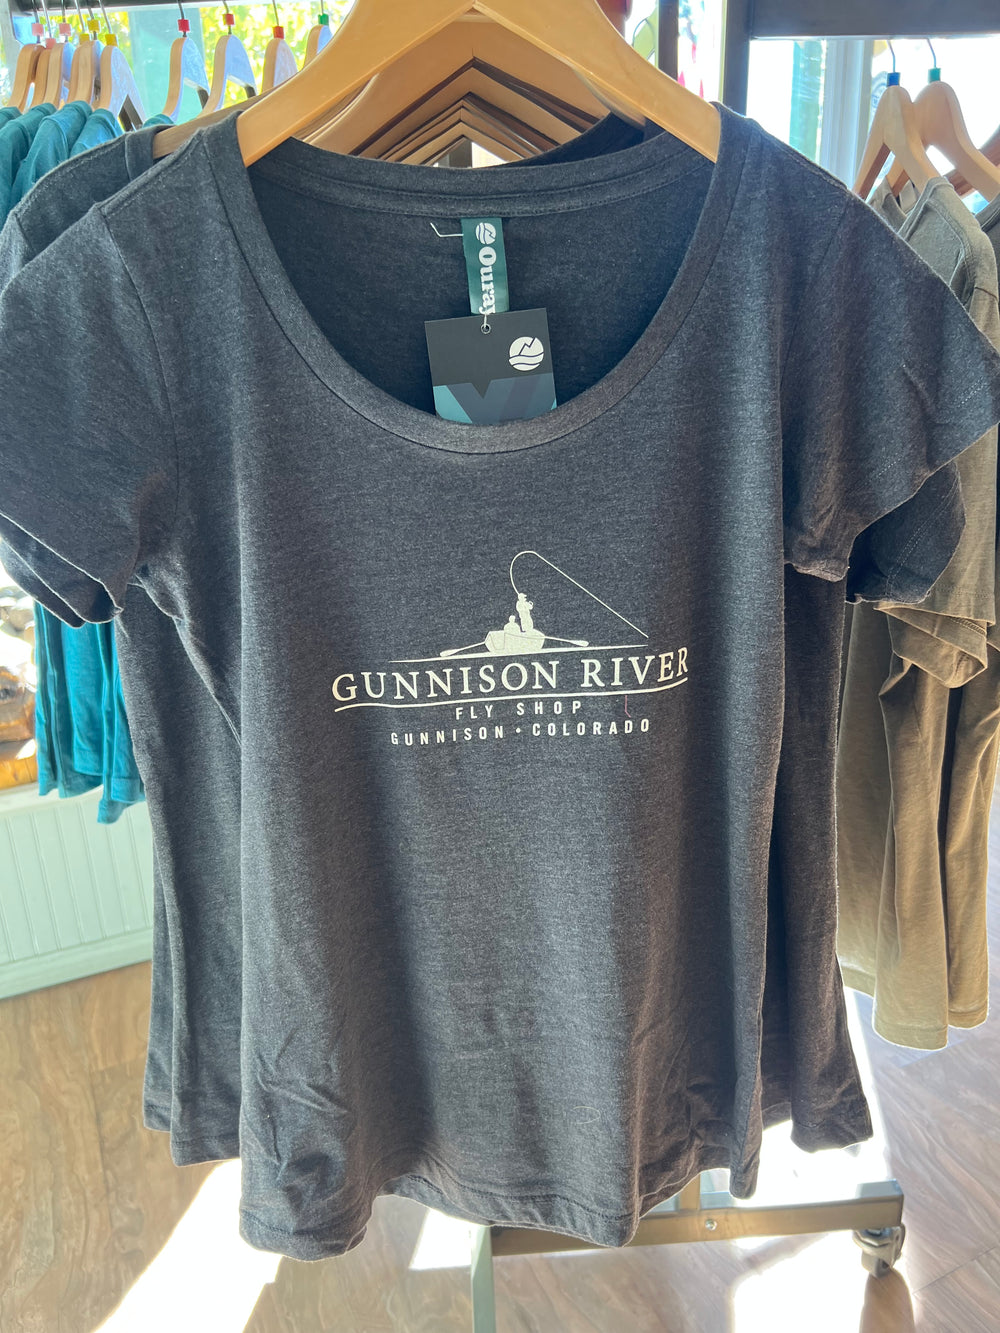 GRFS Ouray women's T-shirt Catalina green and Charcoal